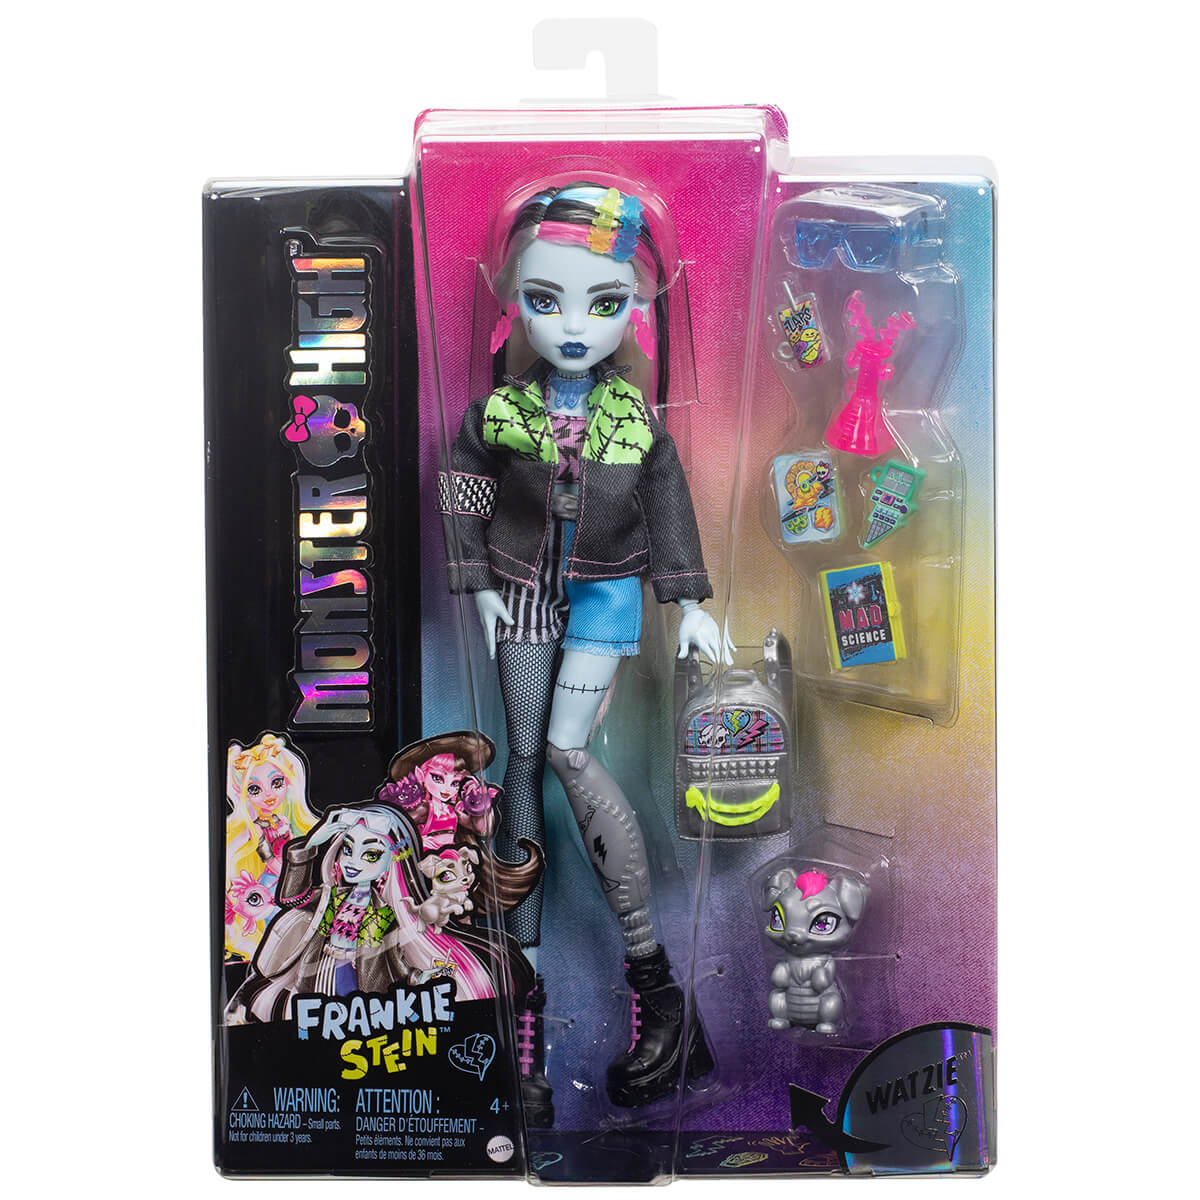 Package for the Monster High Frankie Stein Doll with Pet